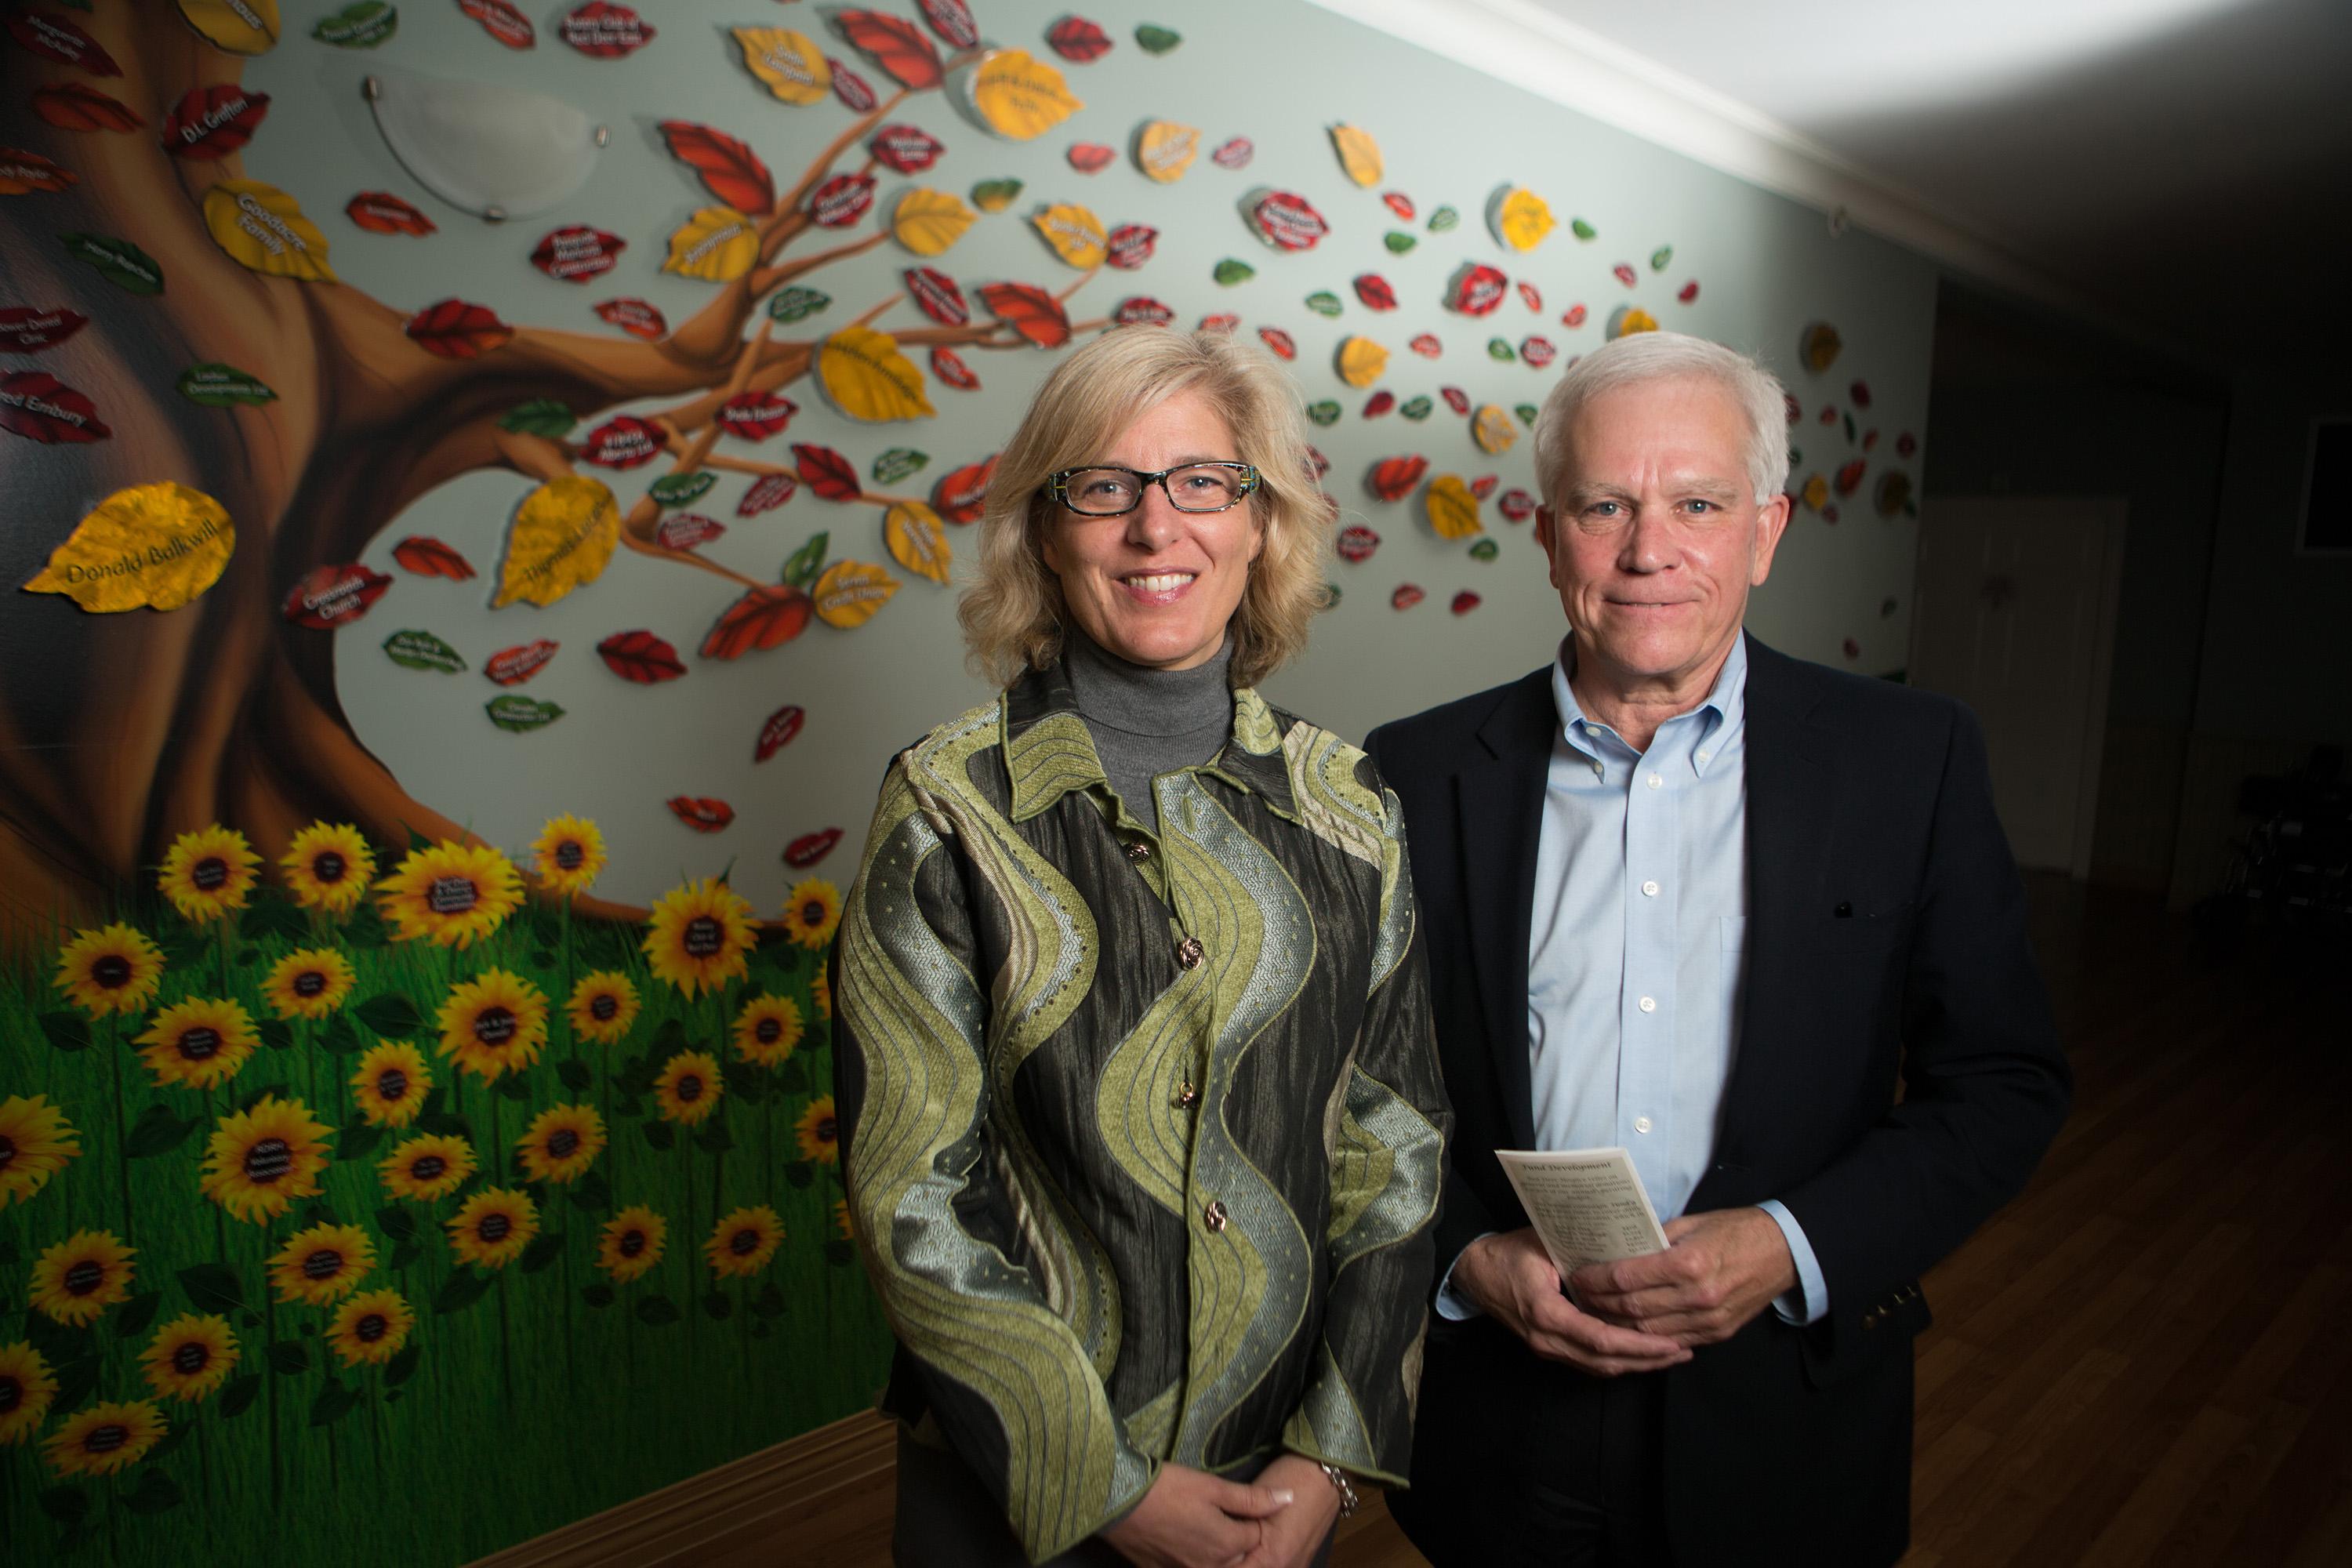 MILESTONE - Suzanne Alexander-Smith and Bryan Wilson stand by the donor wall of the Red Deer Hospice last week. The Hospice recently marked 10 years of service to the community.